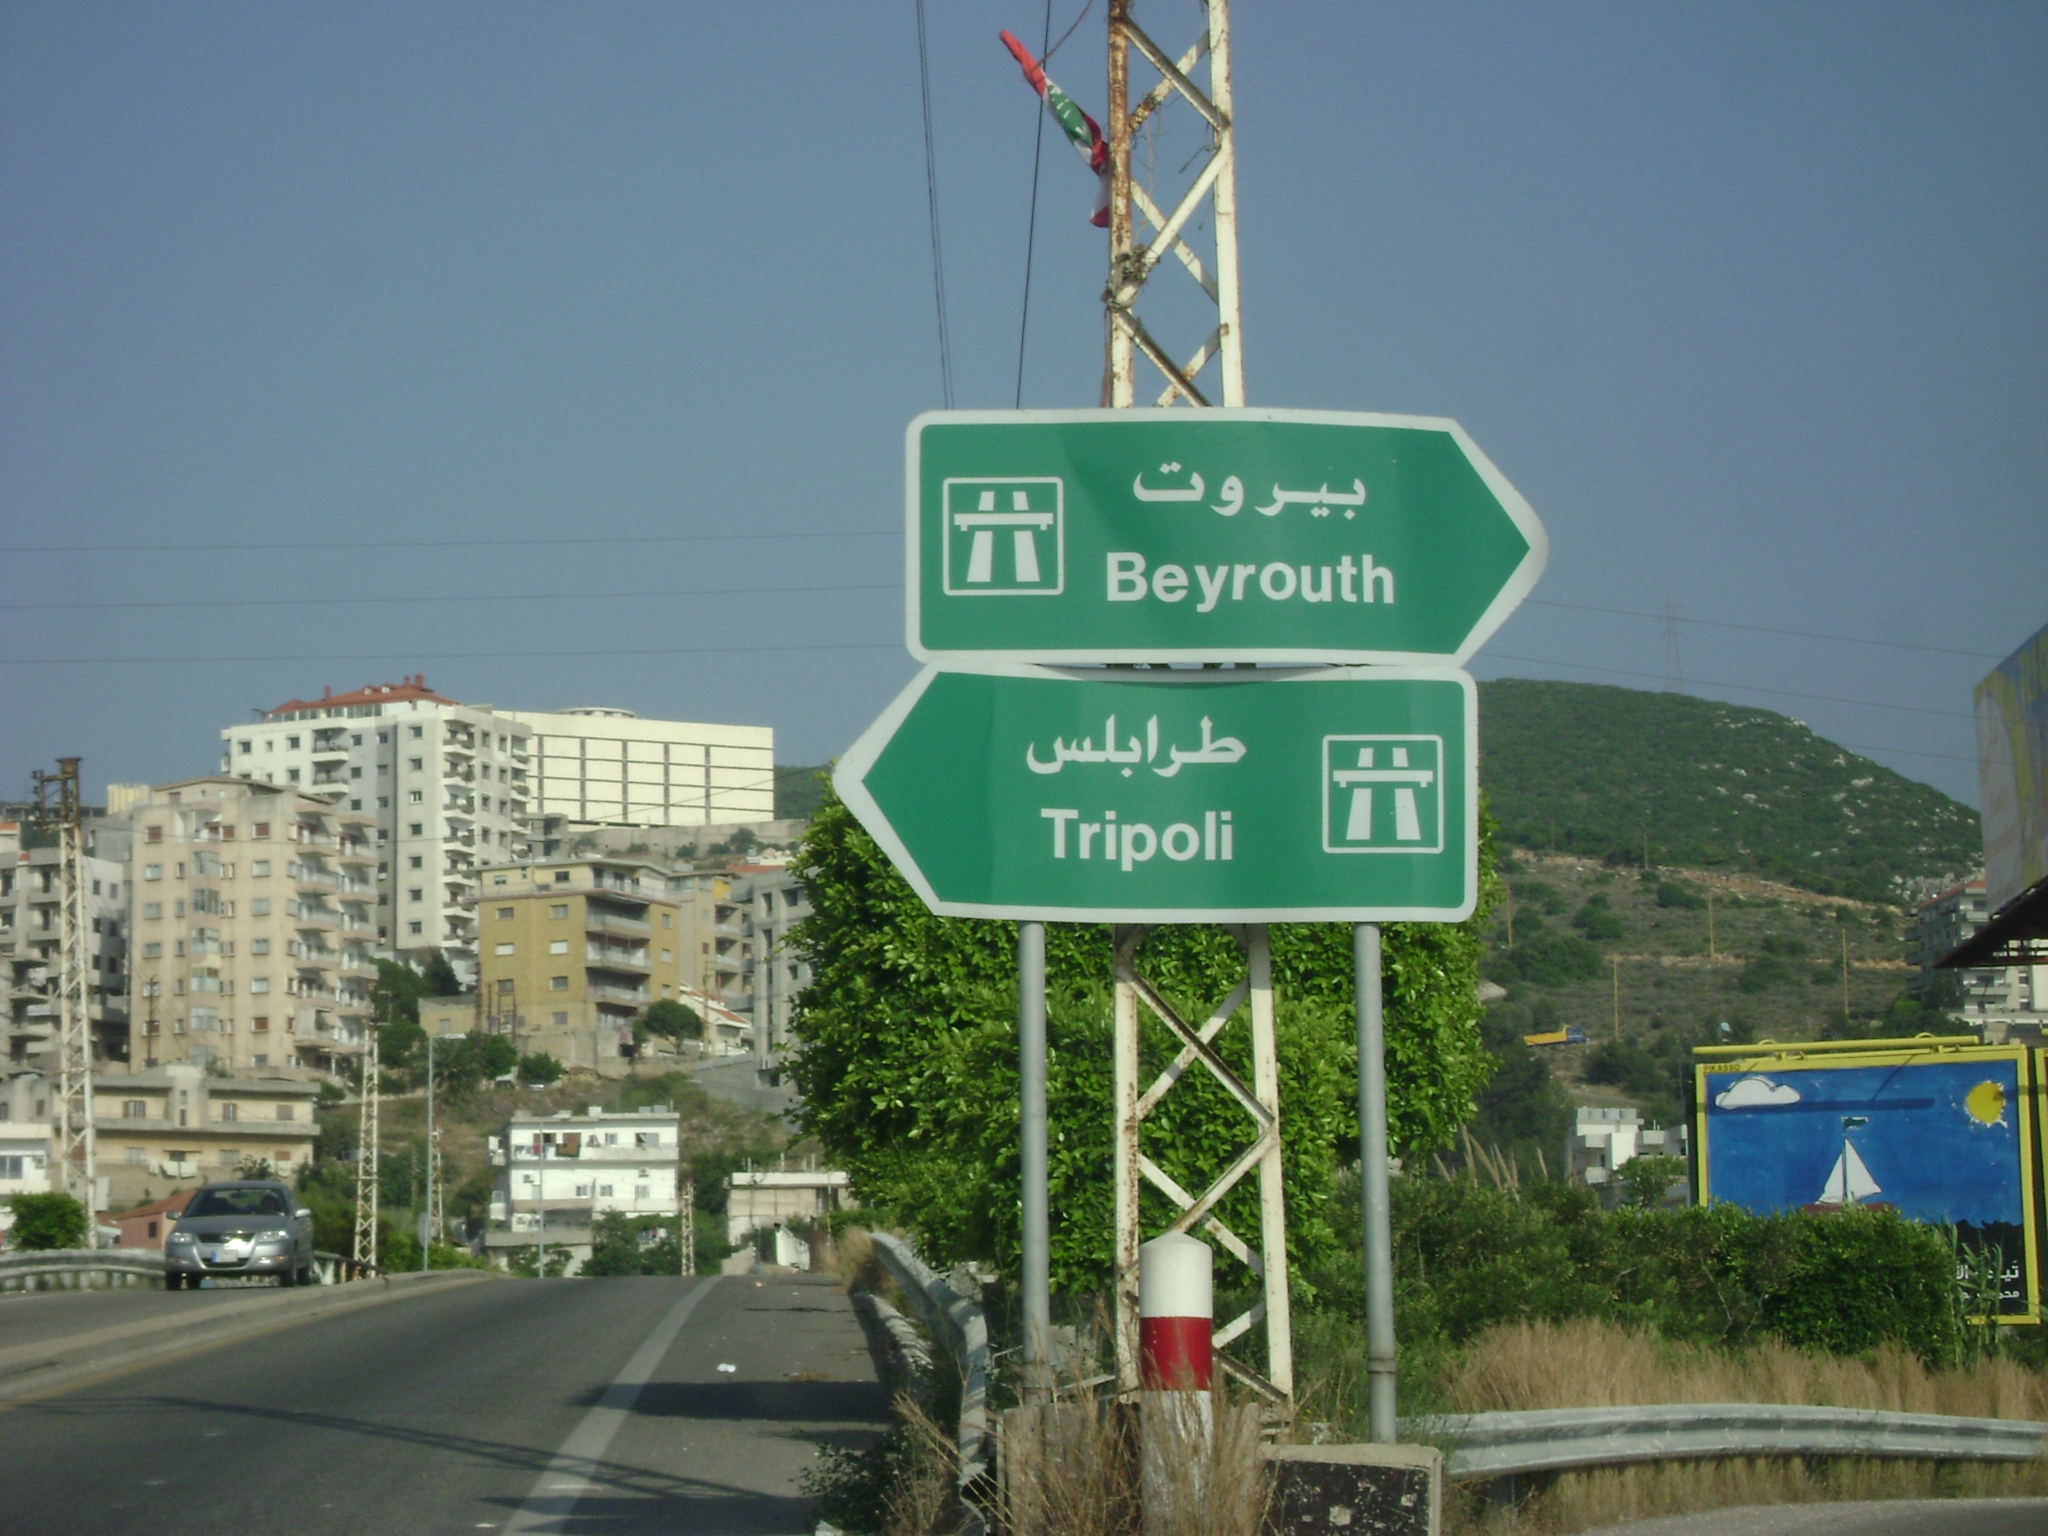 Tripoli and Beyrouth signs